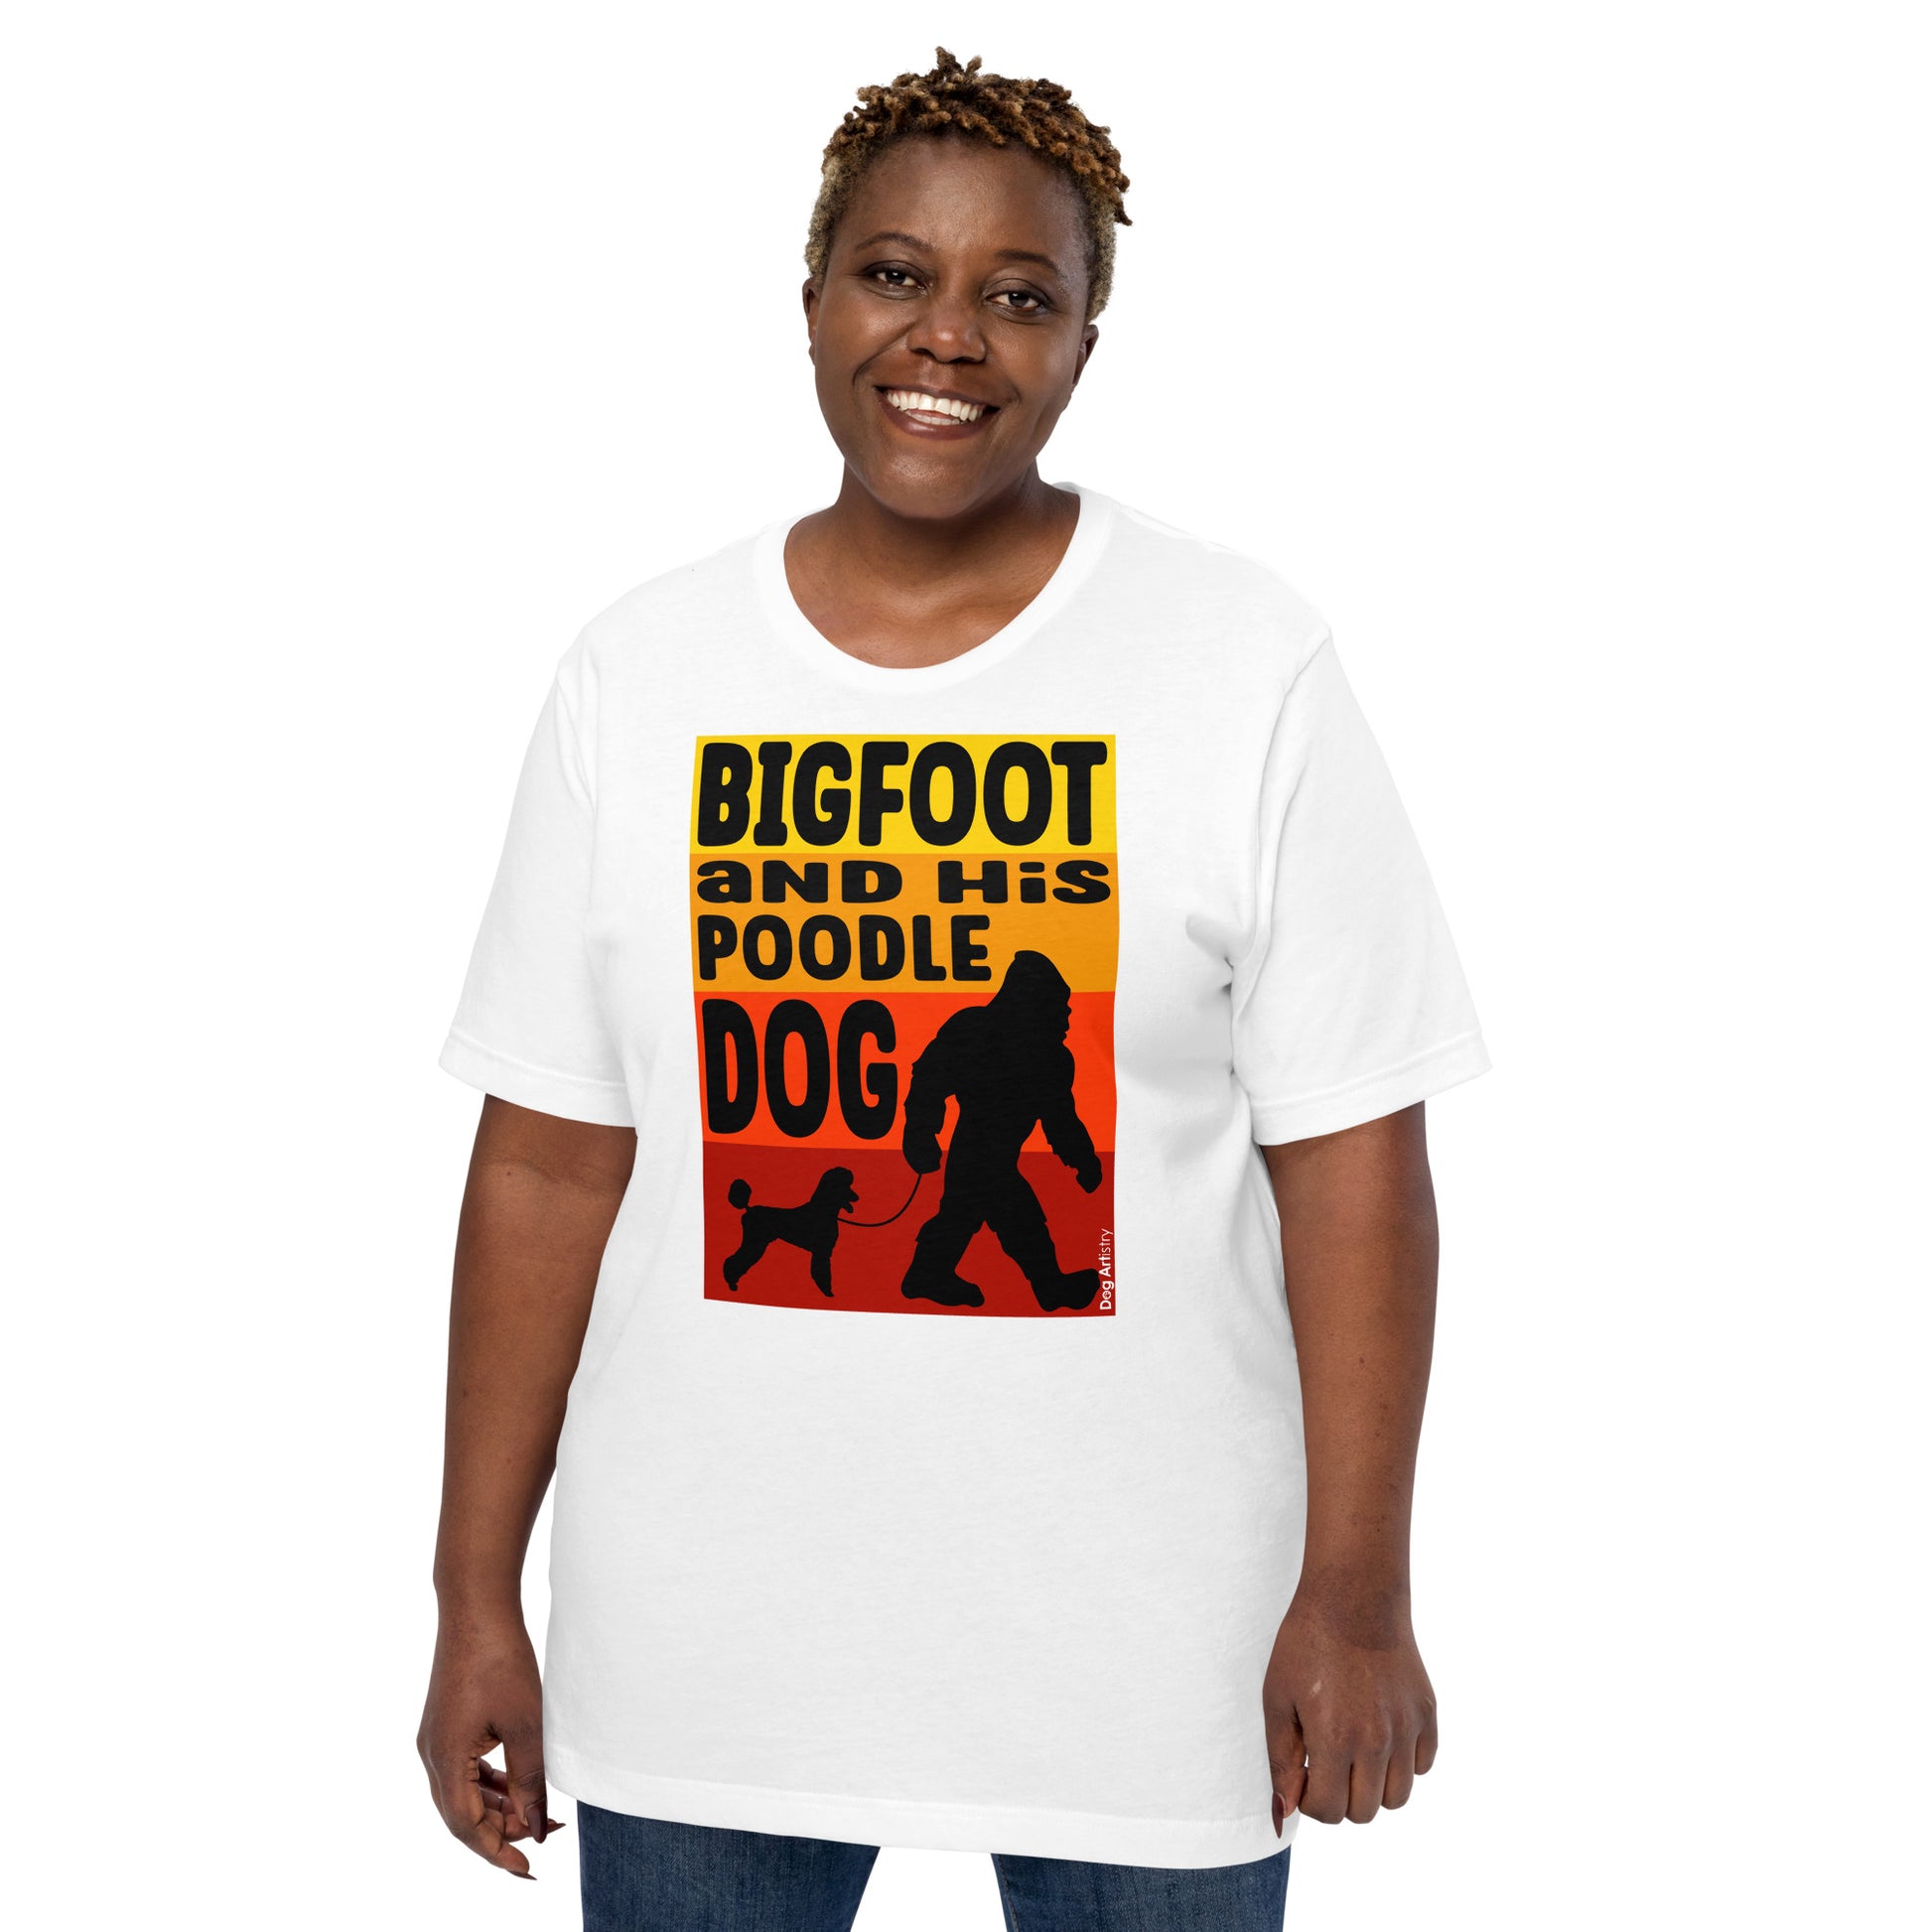 Bigfoot and his Poodle unisex white t-shirt by Dog Artistry.